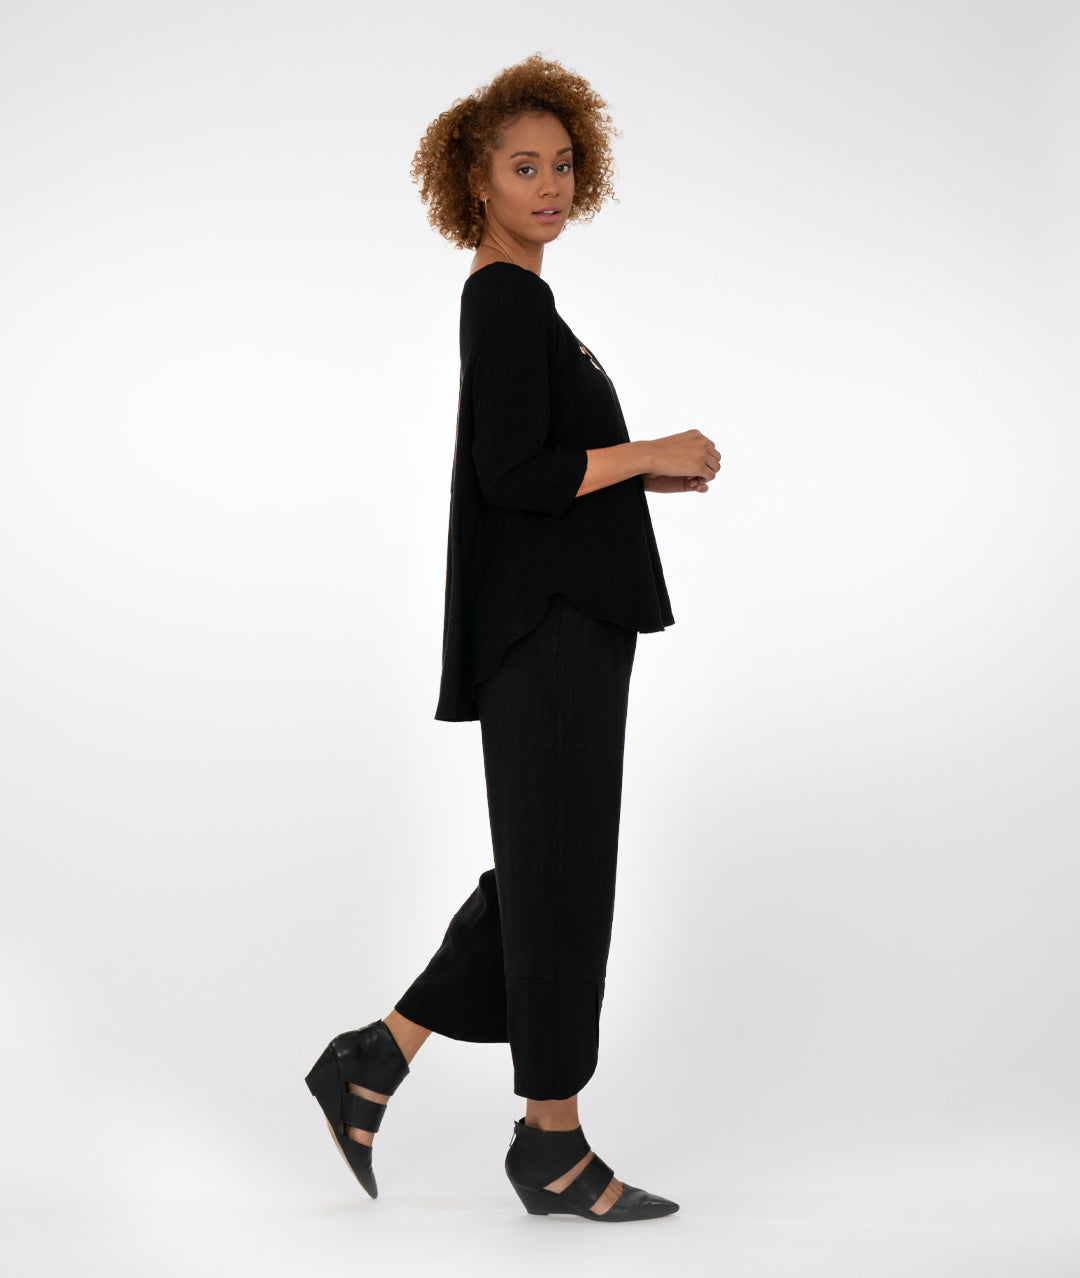 model in a black pant with a matching black top with a lower hem in the back